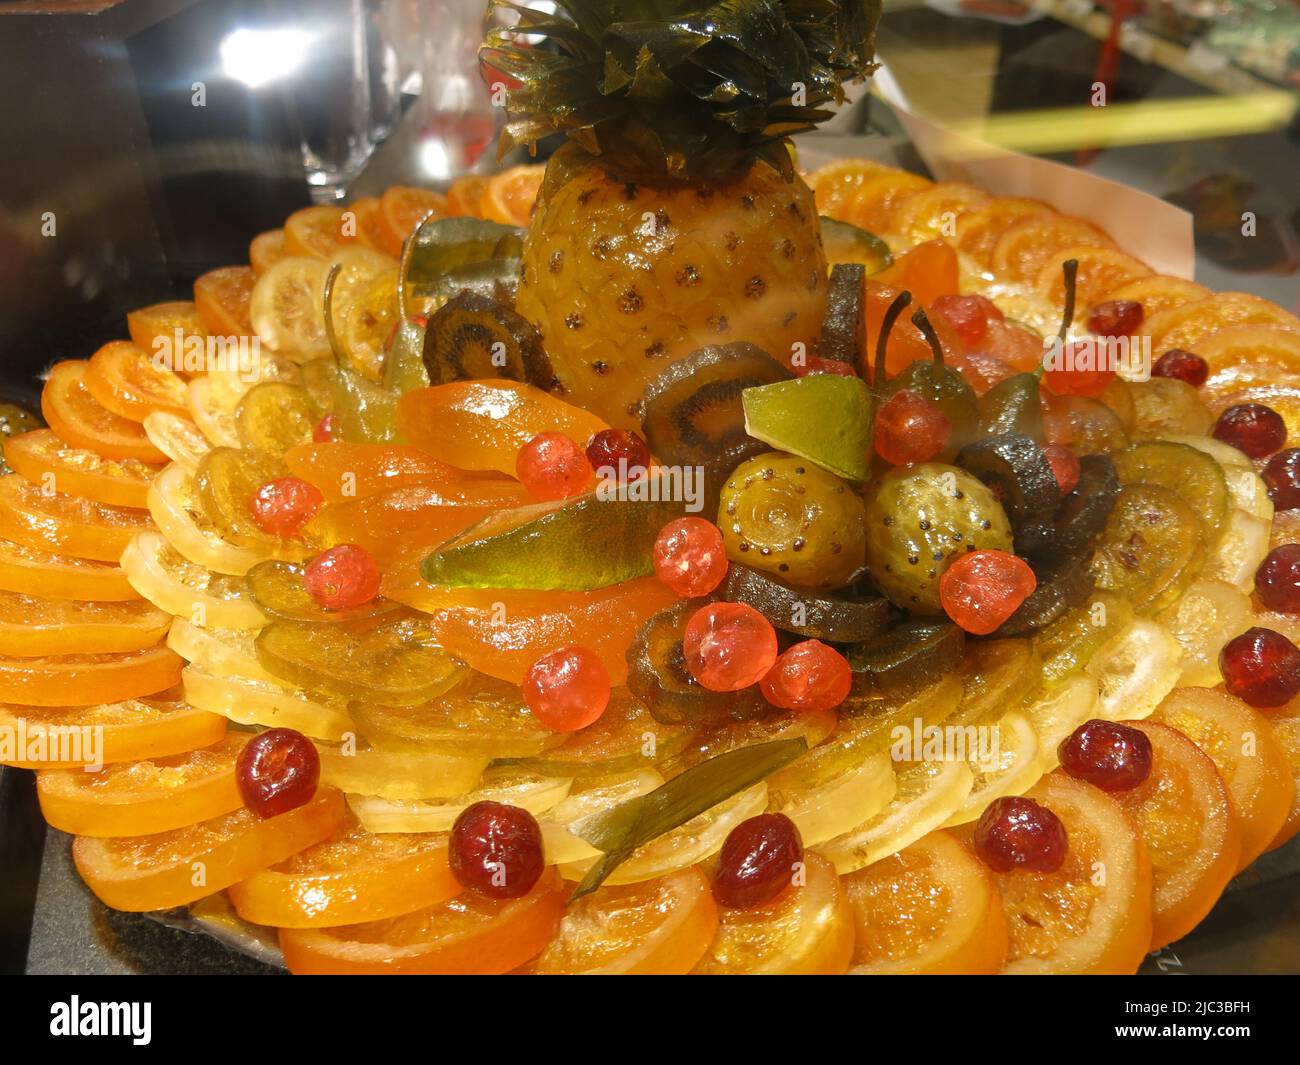 A platter of glacé fruits in a display cabinet at Les Halles de Lyon - Paul Bocuse, a haven for French cuisine. Stock Photo